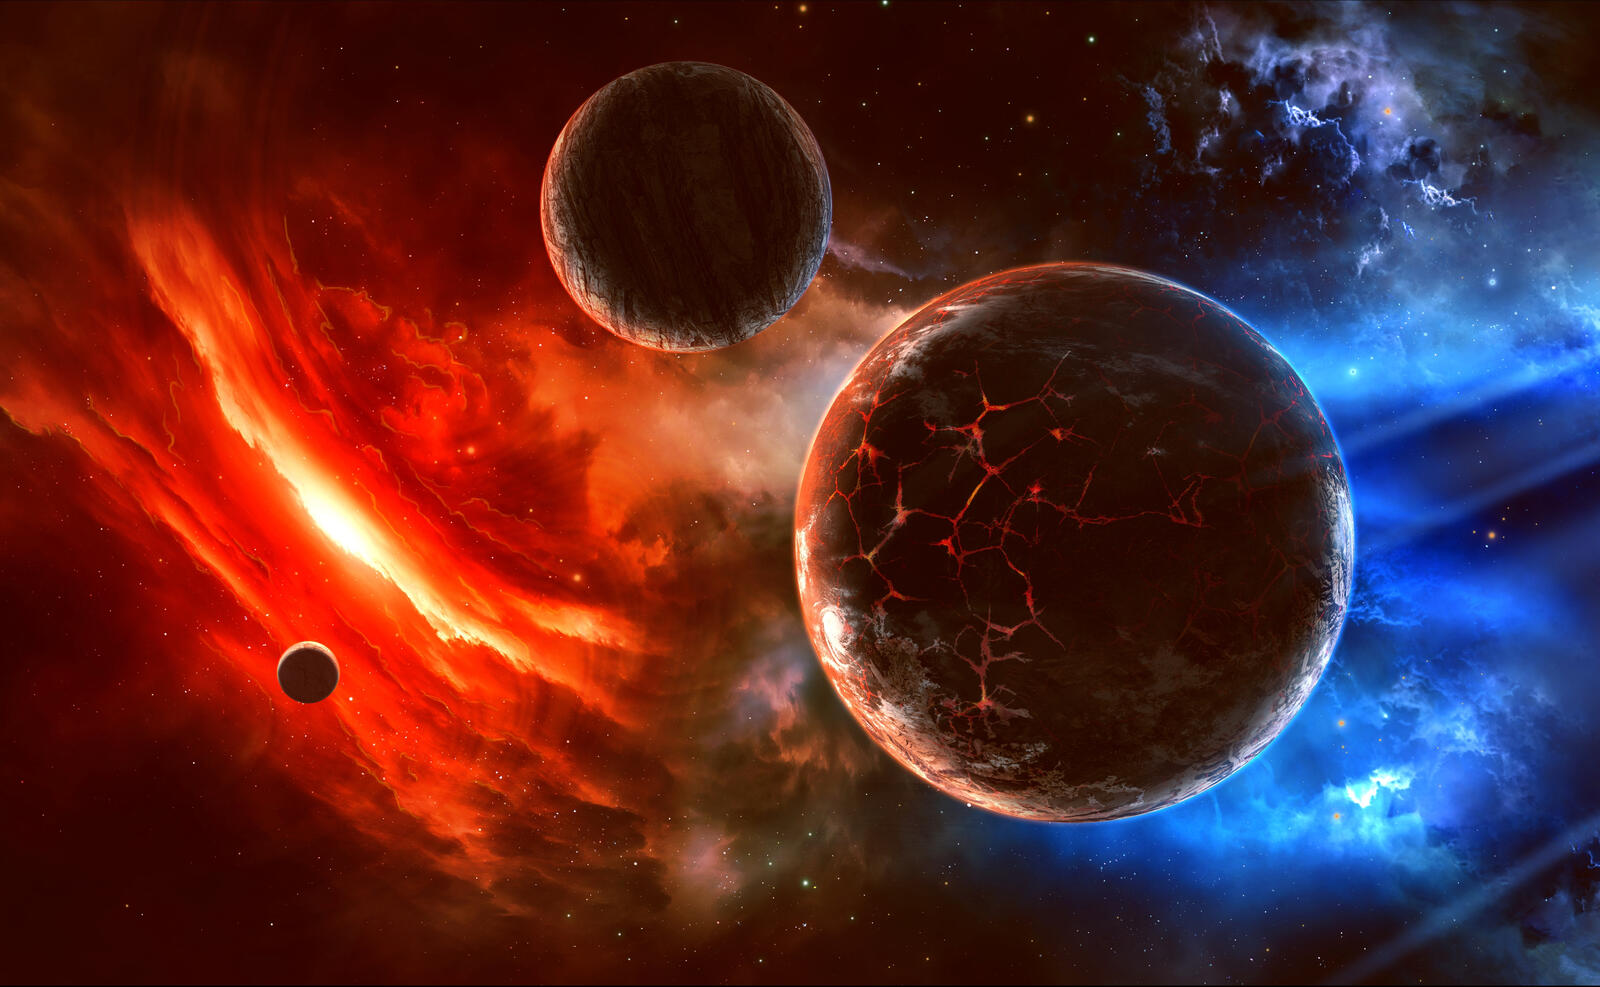 Wallpapers weightlessness red planets on the desktop